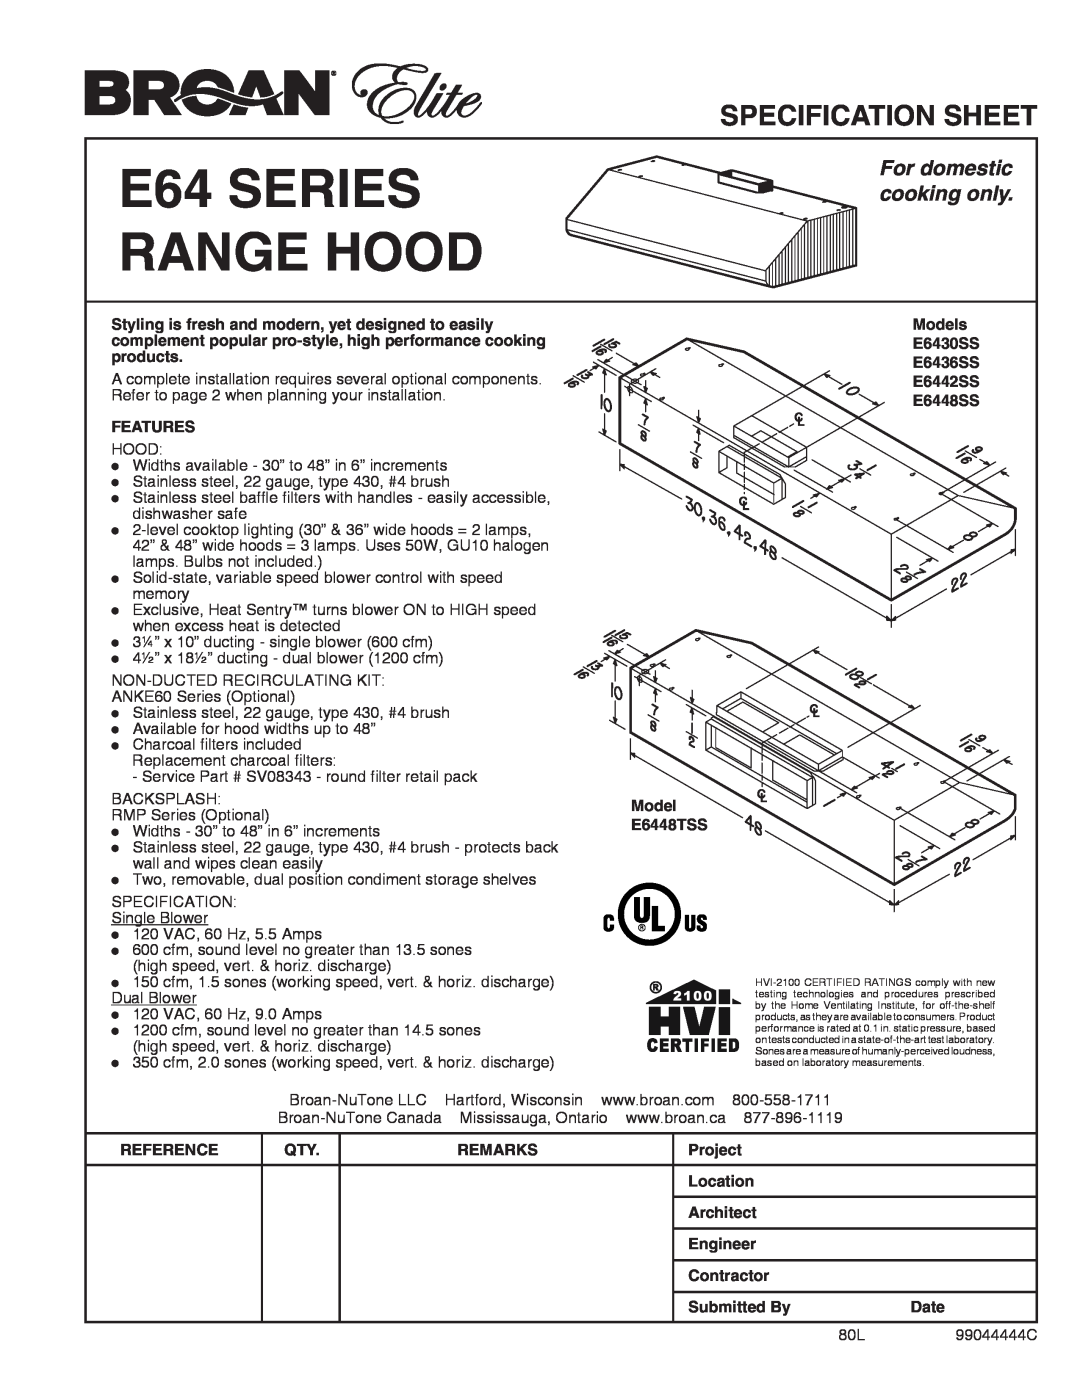 Broan E6442SS, E6448SS, E6448TSS specifications E64 SERIES RANGE HOOD, Specification Sheet, For domestic cooking only 